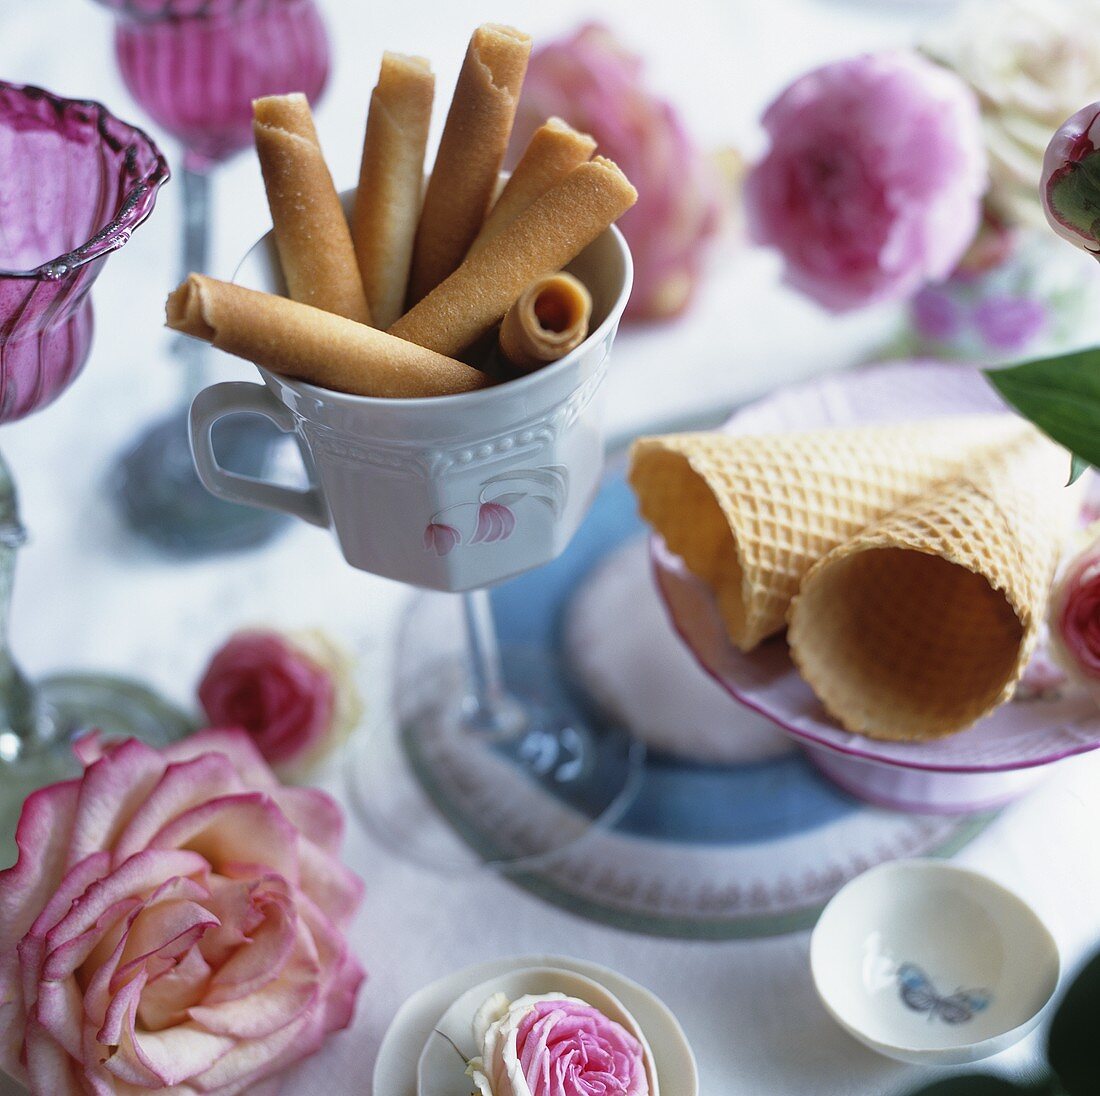 Ice cream cones and biscuit rolls surrounded by roses